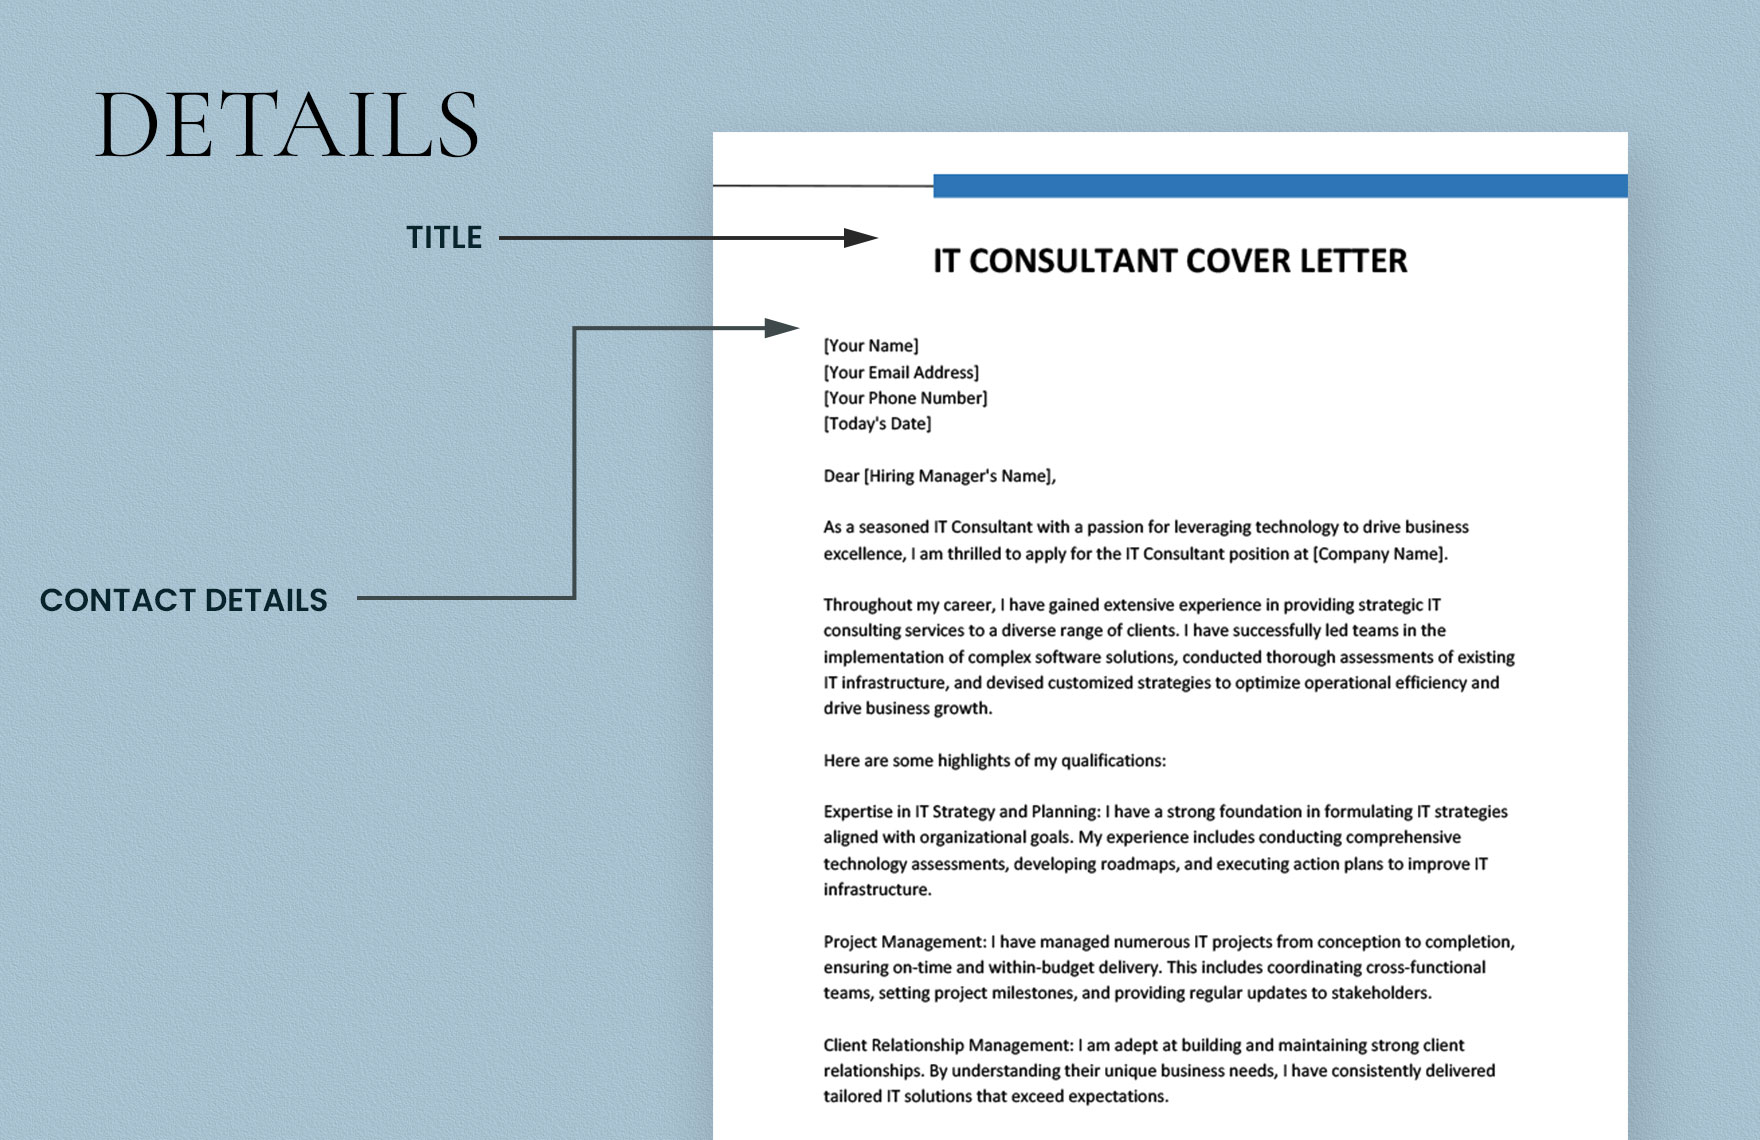 IT Consultant Cover Letter